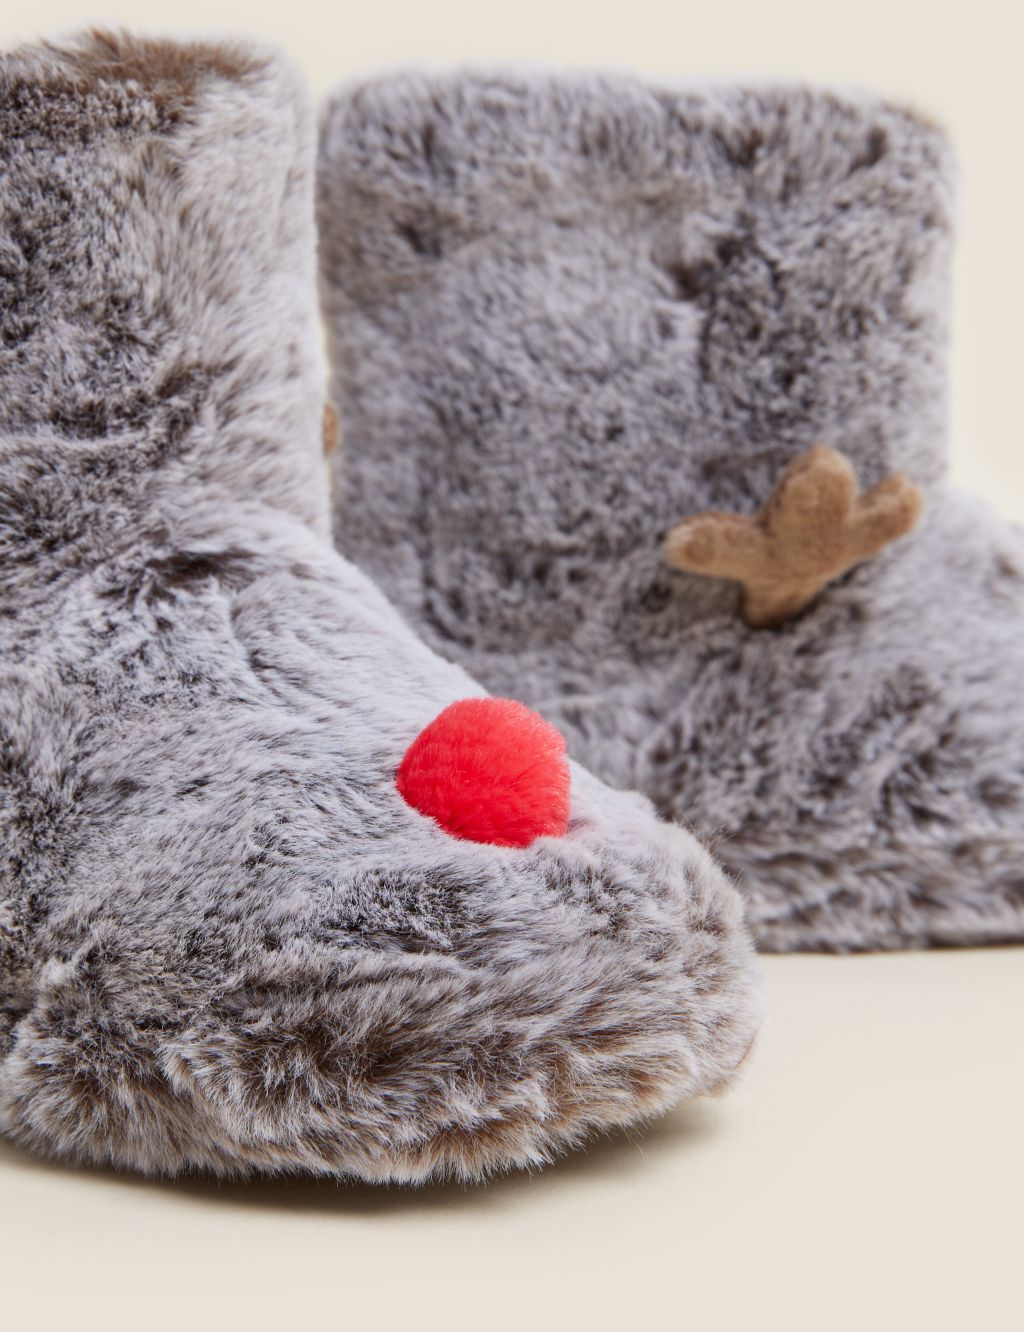 Kids' Reindeer Slipper Boots (4 Small - 6 Large) image 3